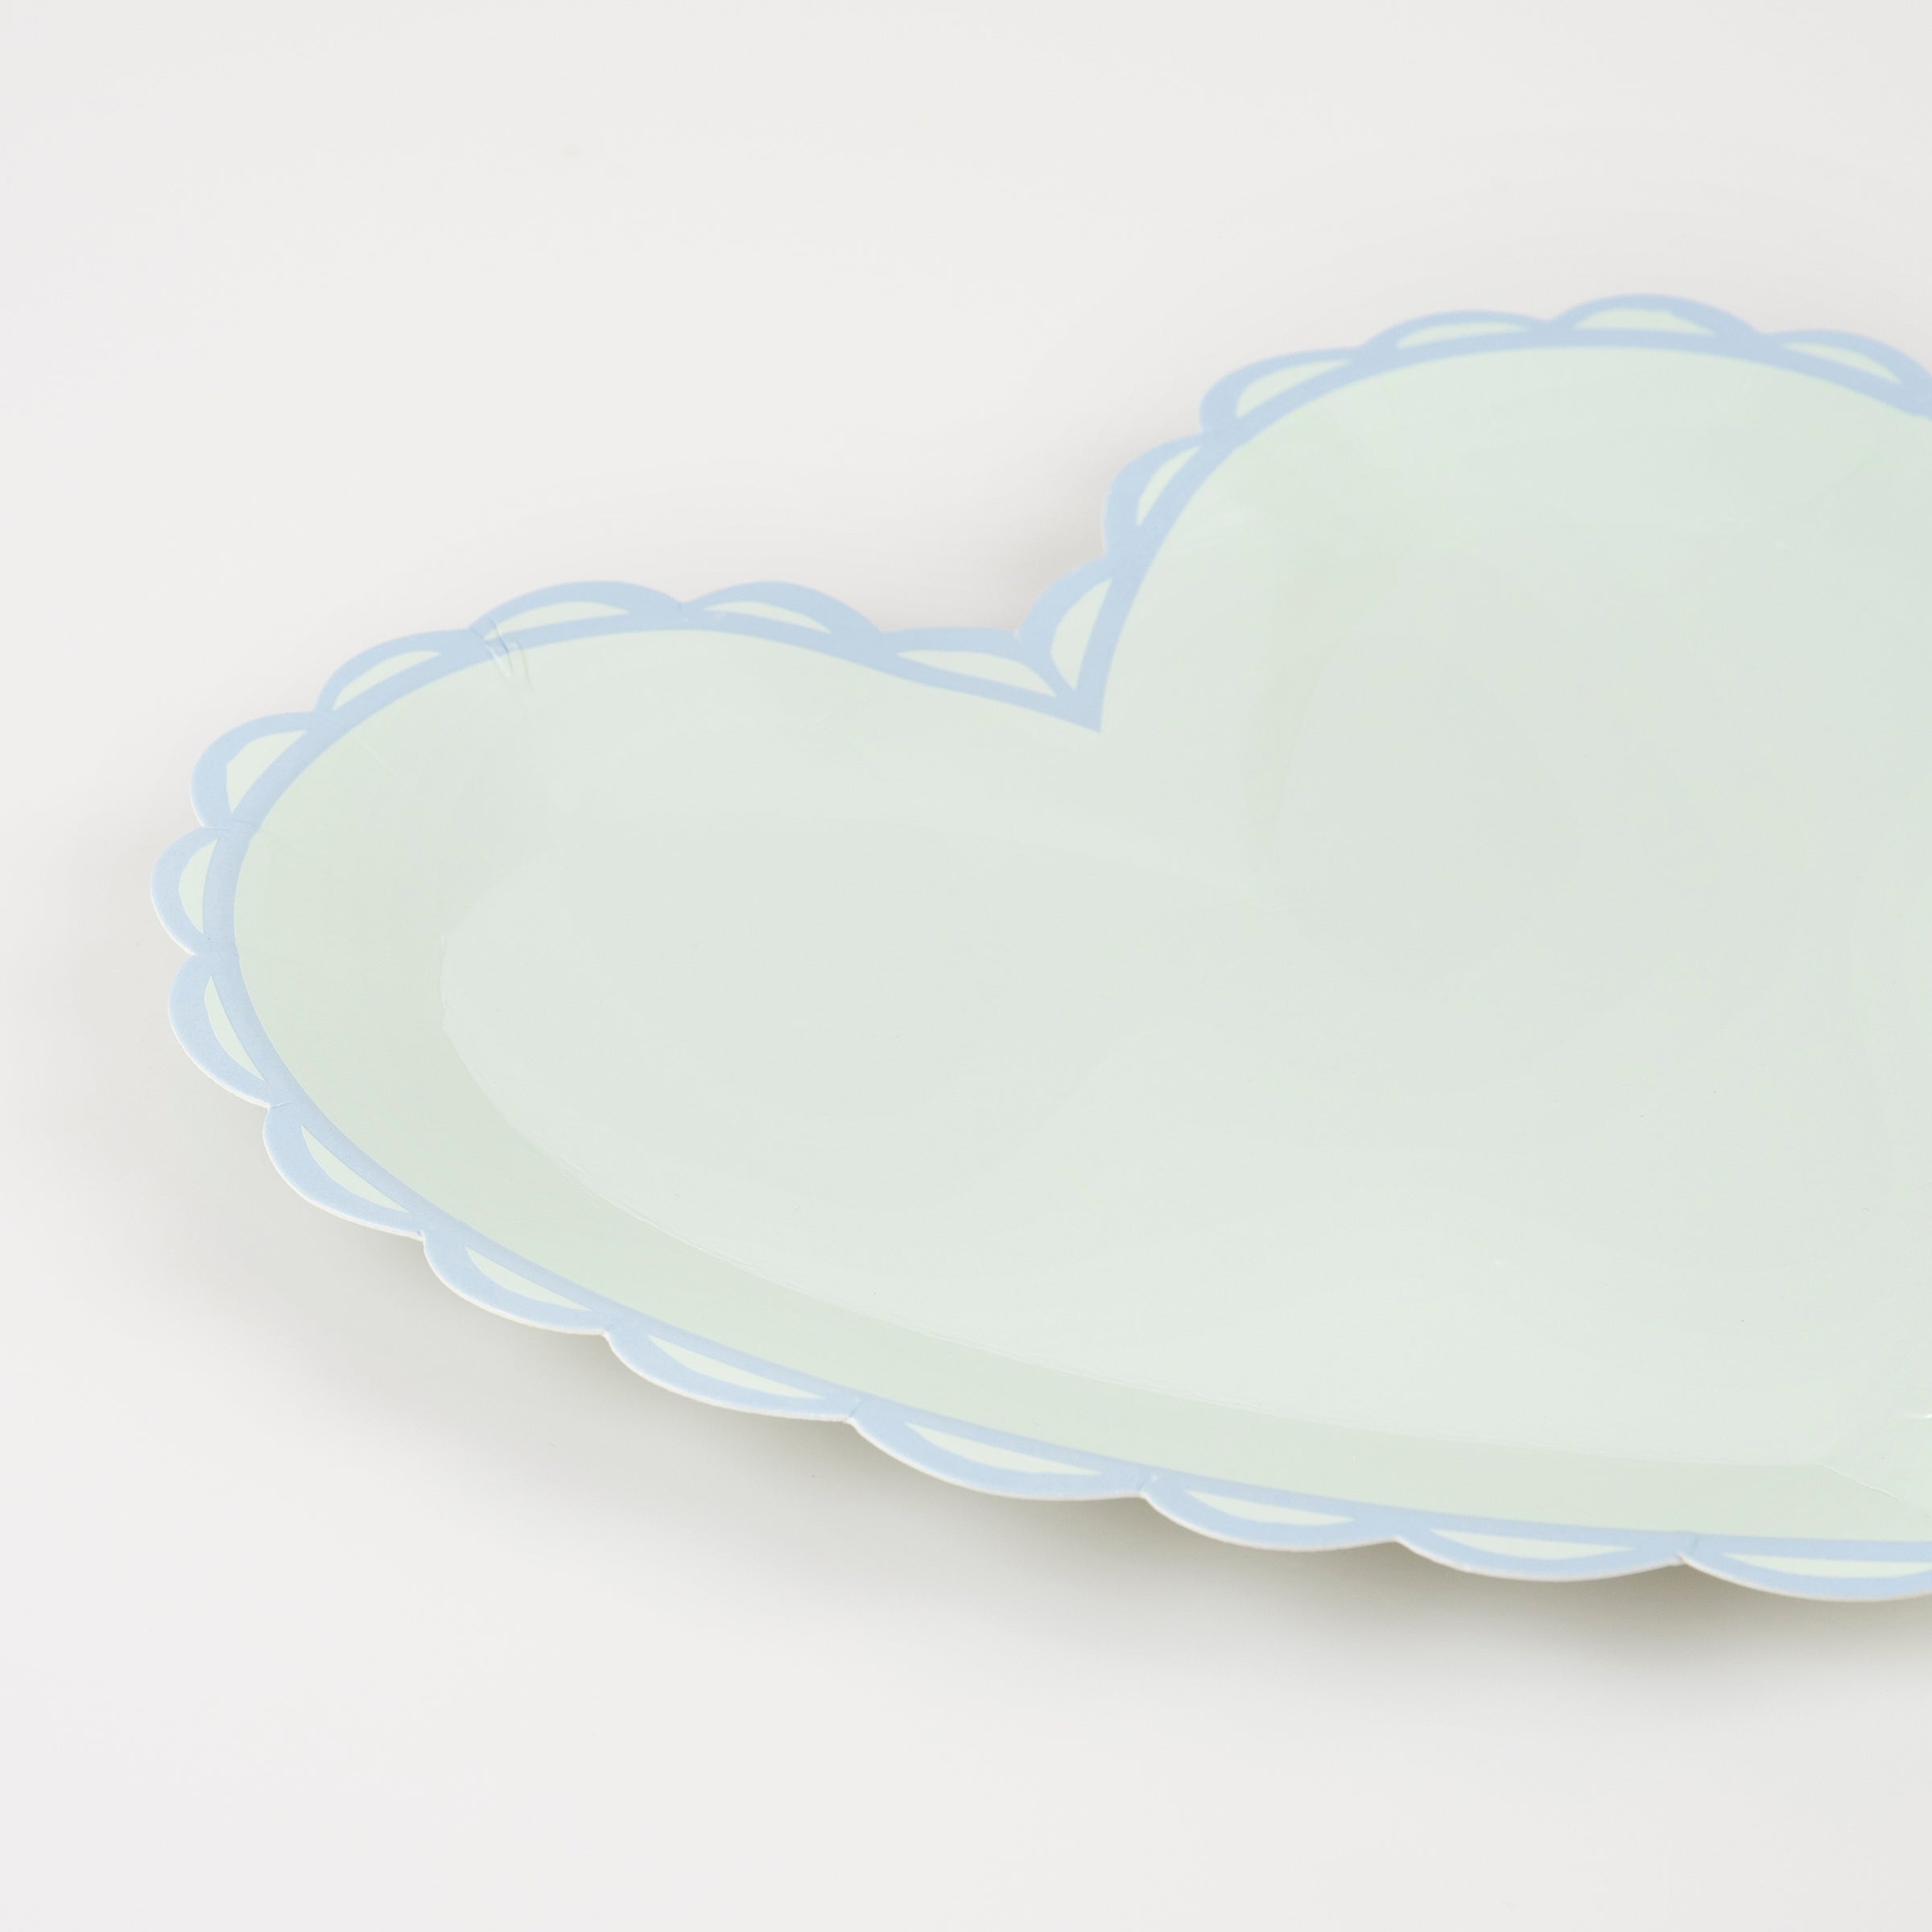 Our small plates, in heart shapes, feature a range of pretty pastel colors and a scalloped border.